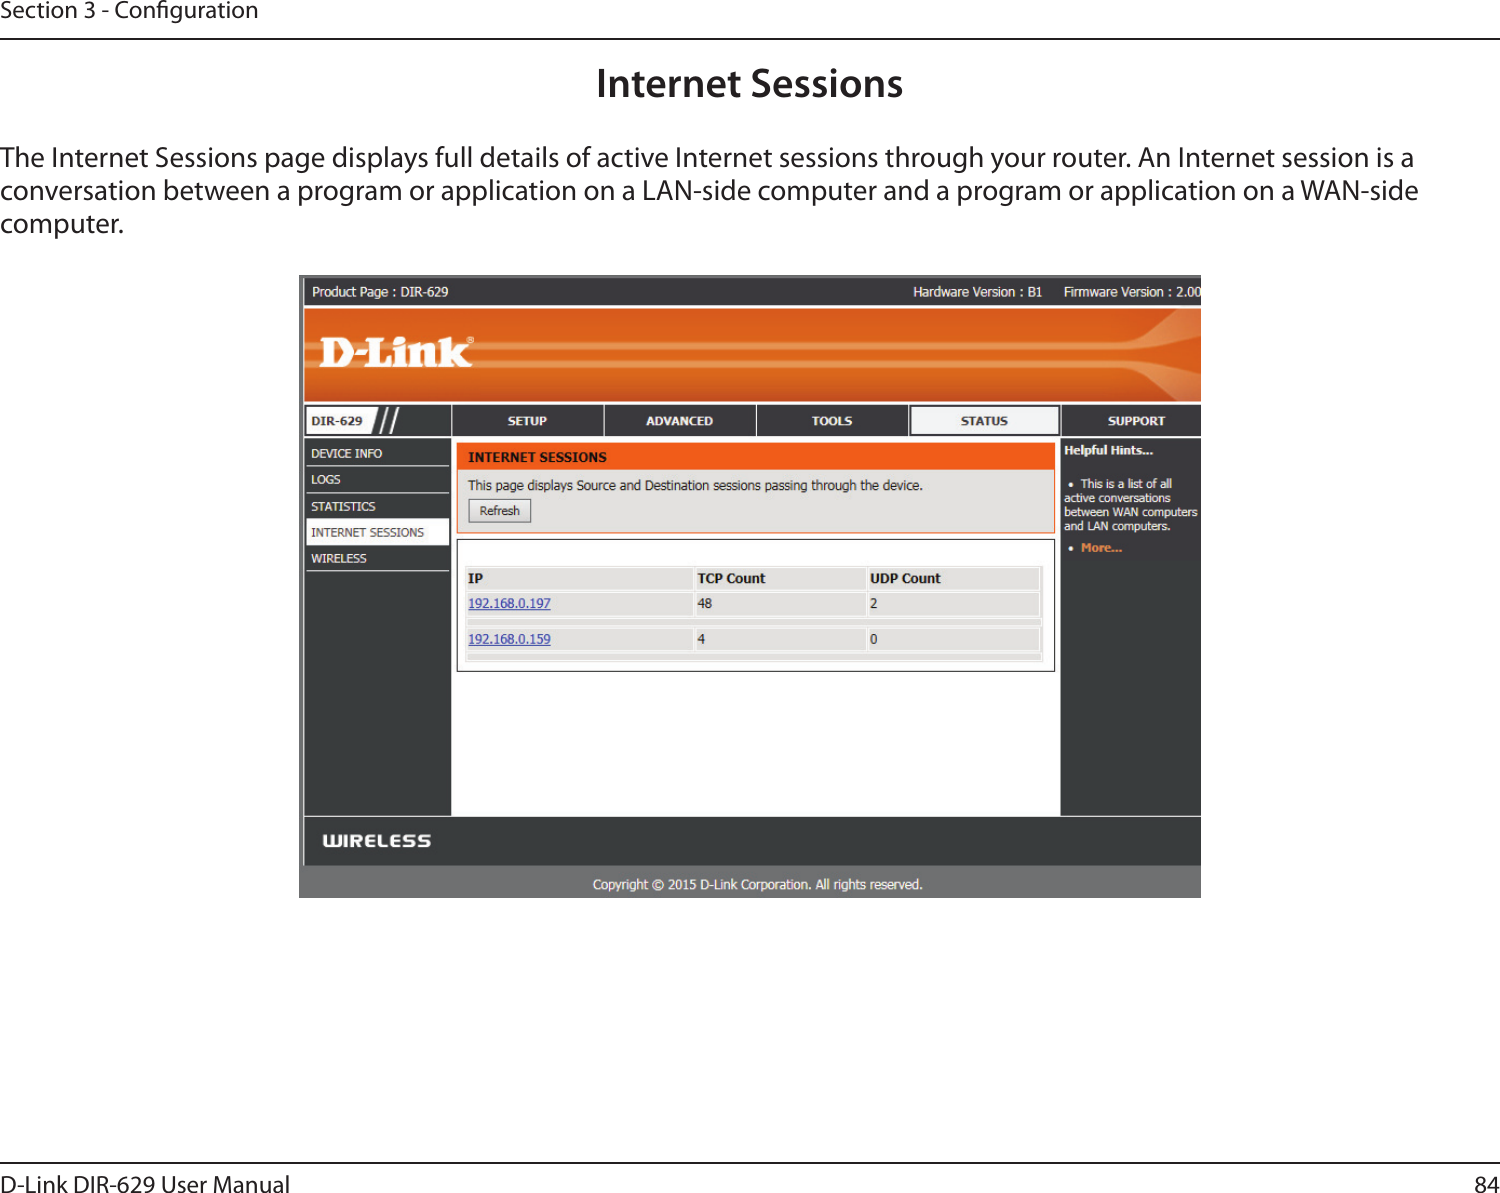 84D-Link DIR-629 User ManualSection 3 - CongurationInternet SessionsThe Internet Sessions page displays full details of active Internet sessions through your router. An Internet session is a conversation between a program or application on a LAN-side computer and a program or application on a WAN-side computer. 